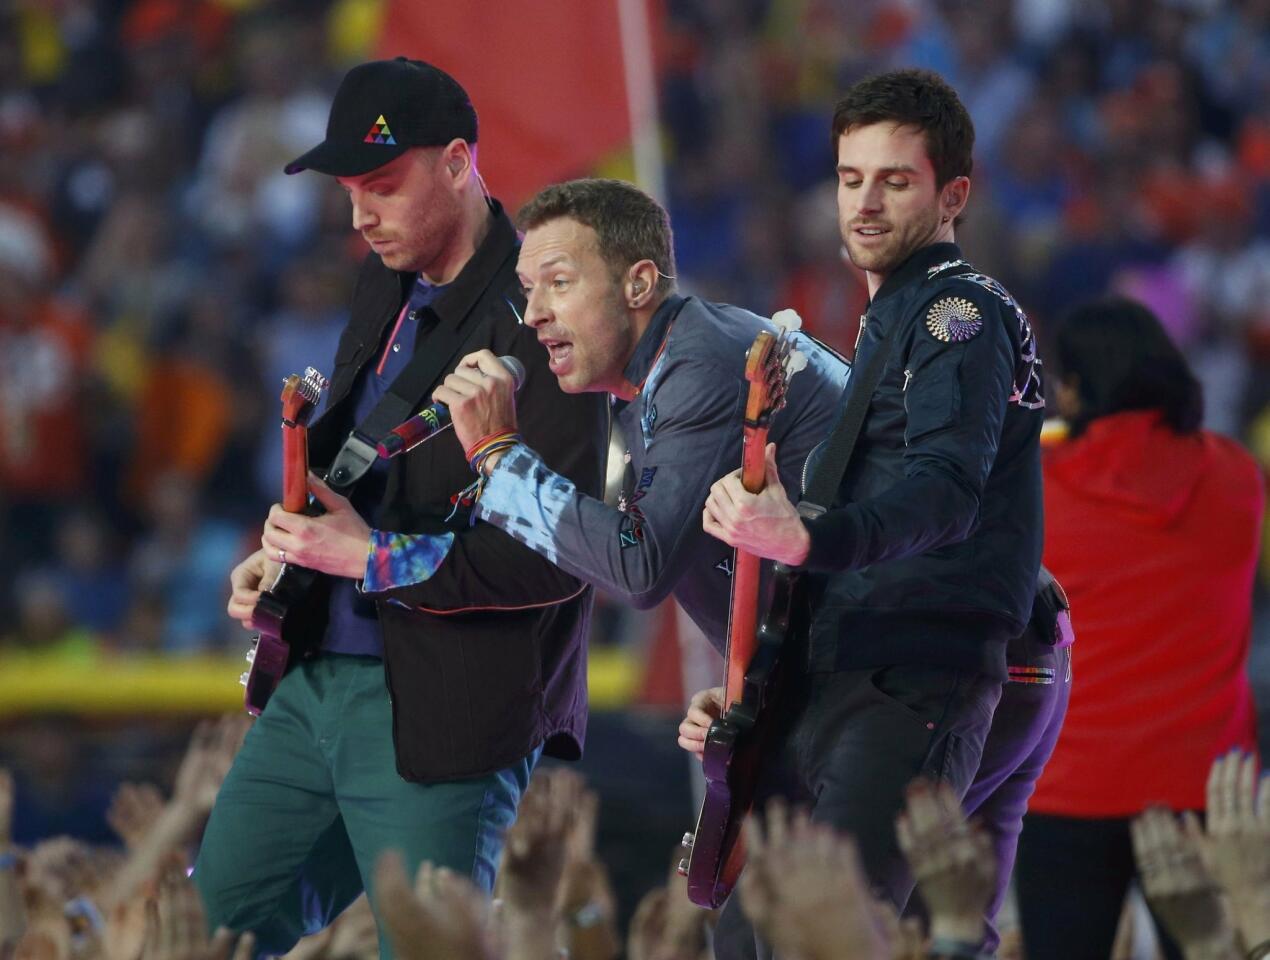 Chris Martin, lead singer of Coldplay, performs with the band during the half-time show at the NFL's Super Bowl 50 between the Carolina Panthers and the Denver Broncos in Santa Clara